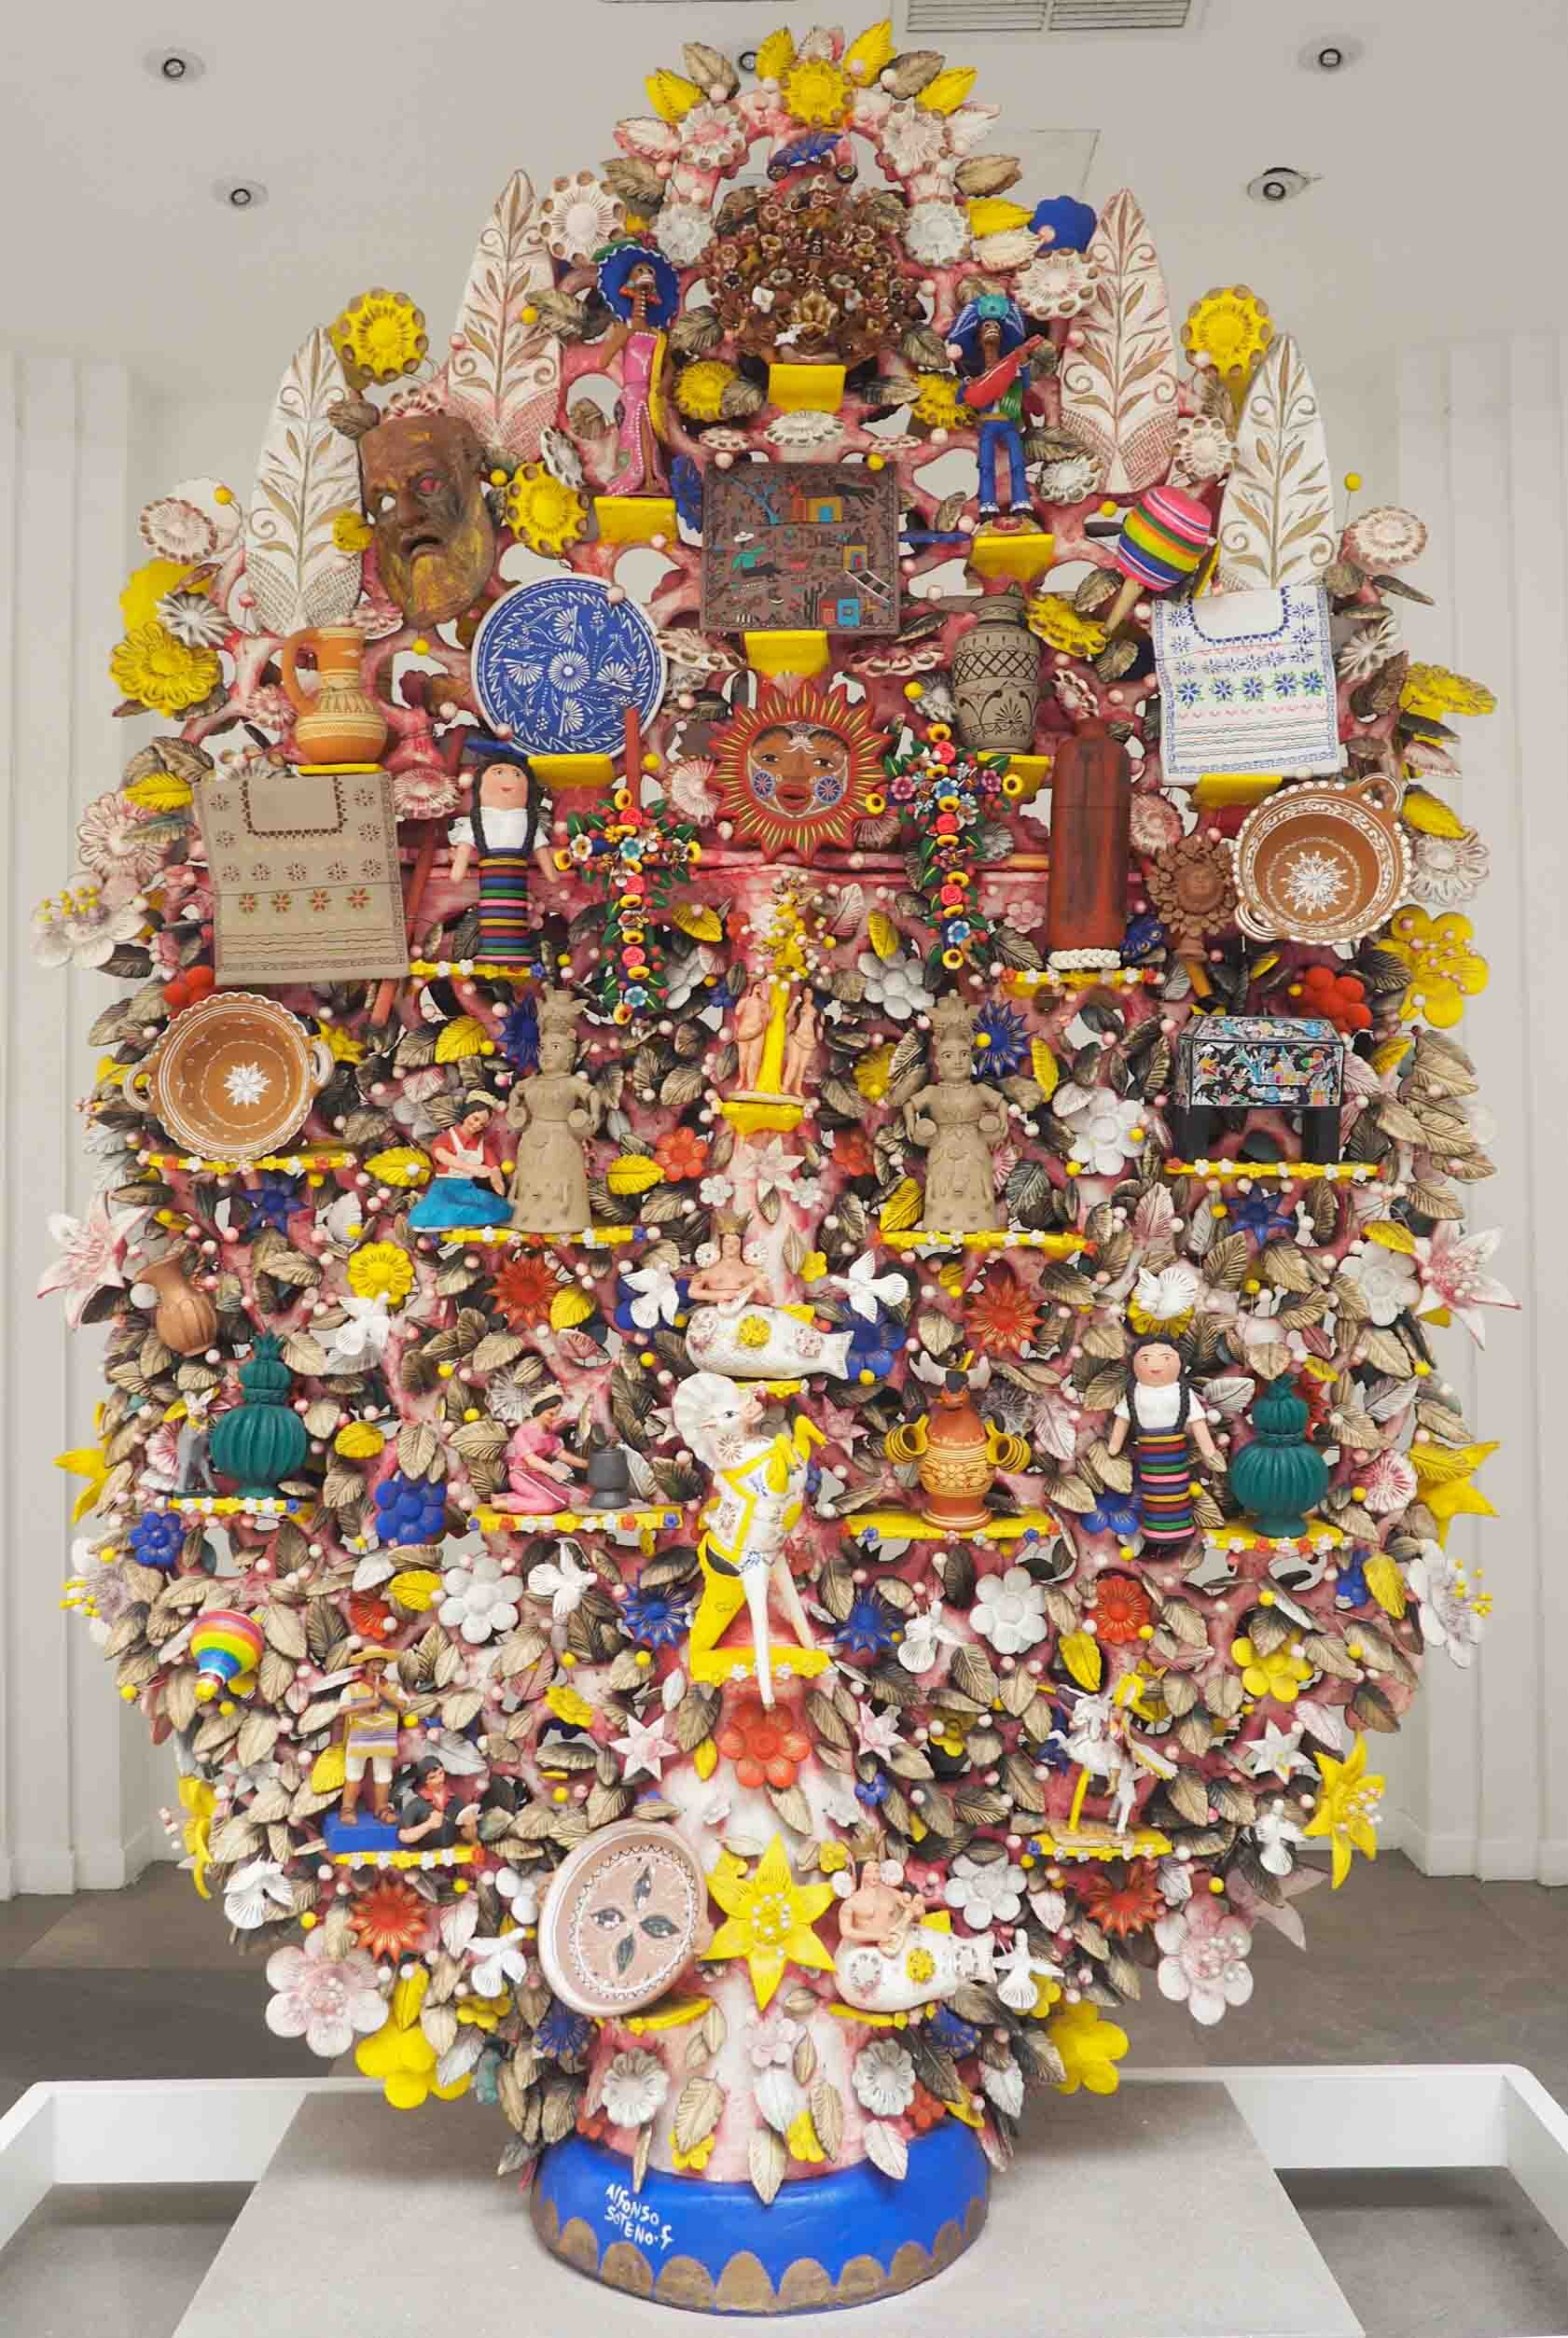 Epic creations at the Folk Art Museum